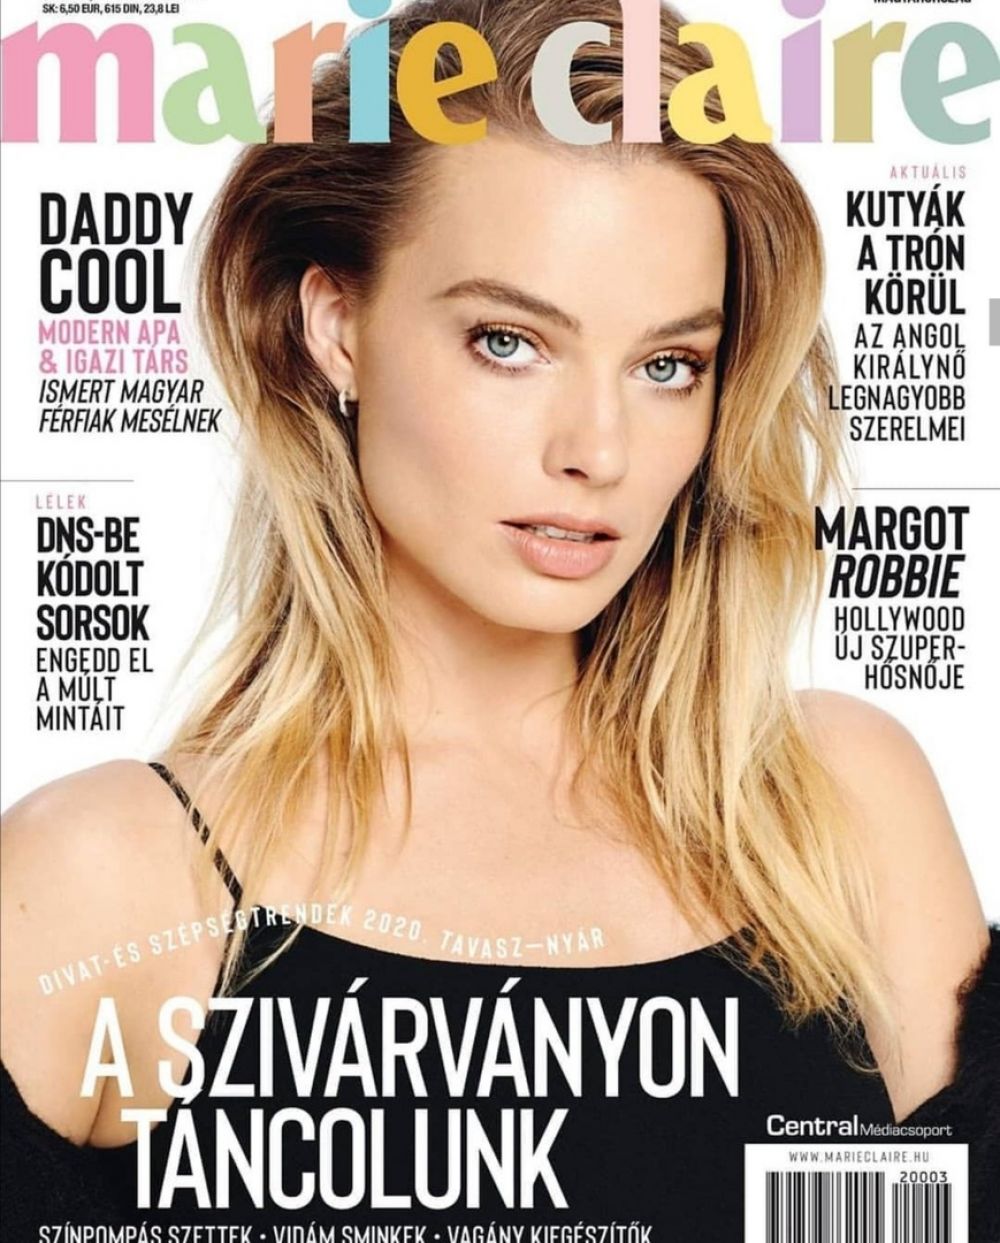 Margot Robbie On The Cover Of Marie Claire Magazine Hungary February 2020 Hawtcelebs